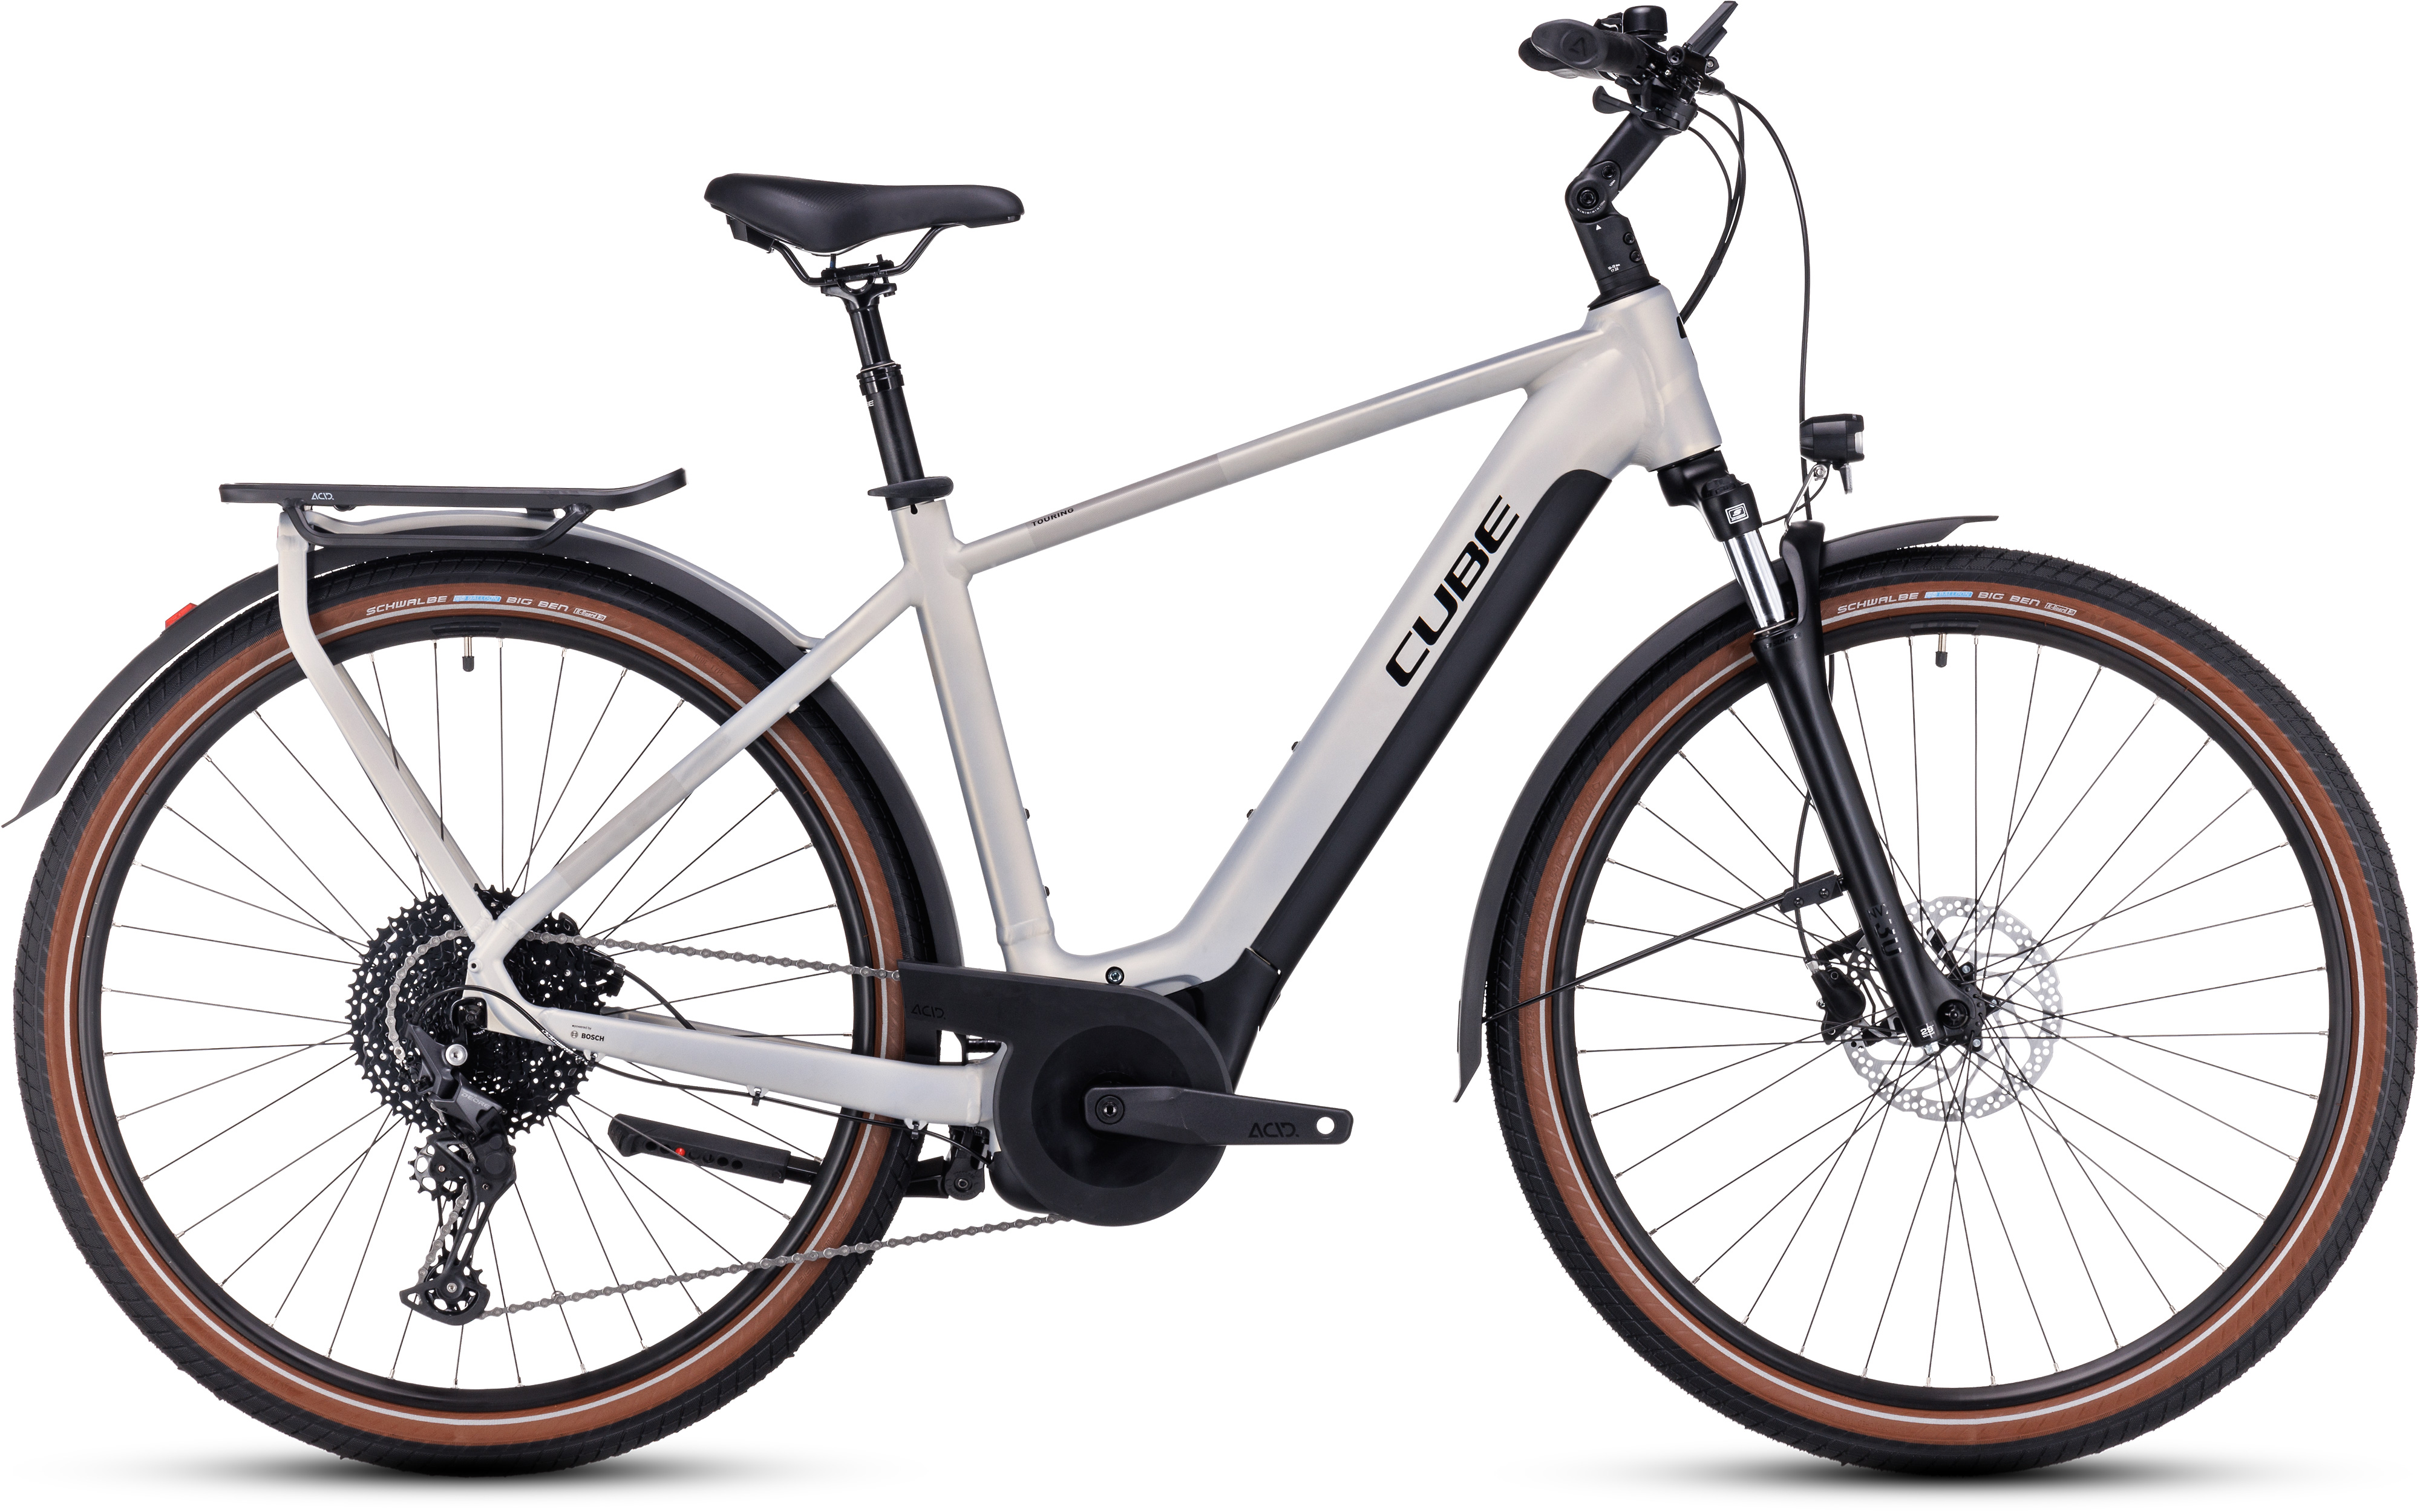 Cube Touring Hybrid Pro 500 pearlysilver´n´black